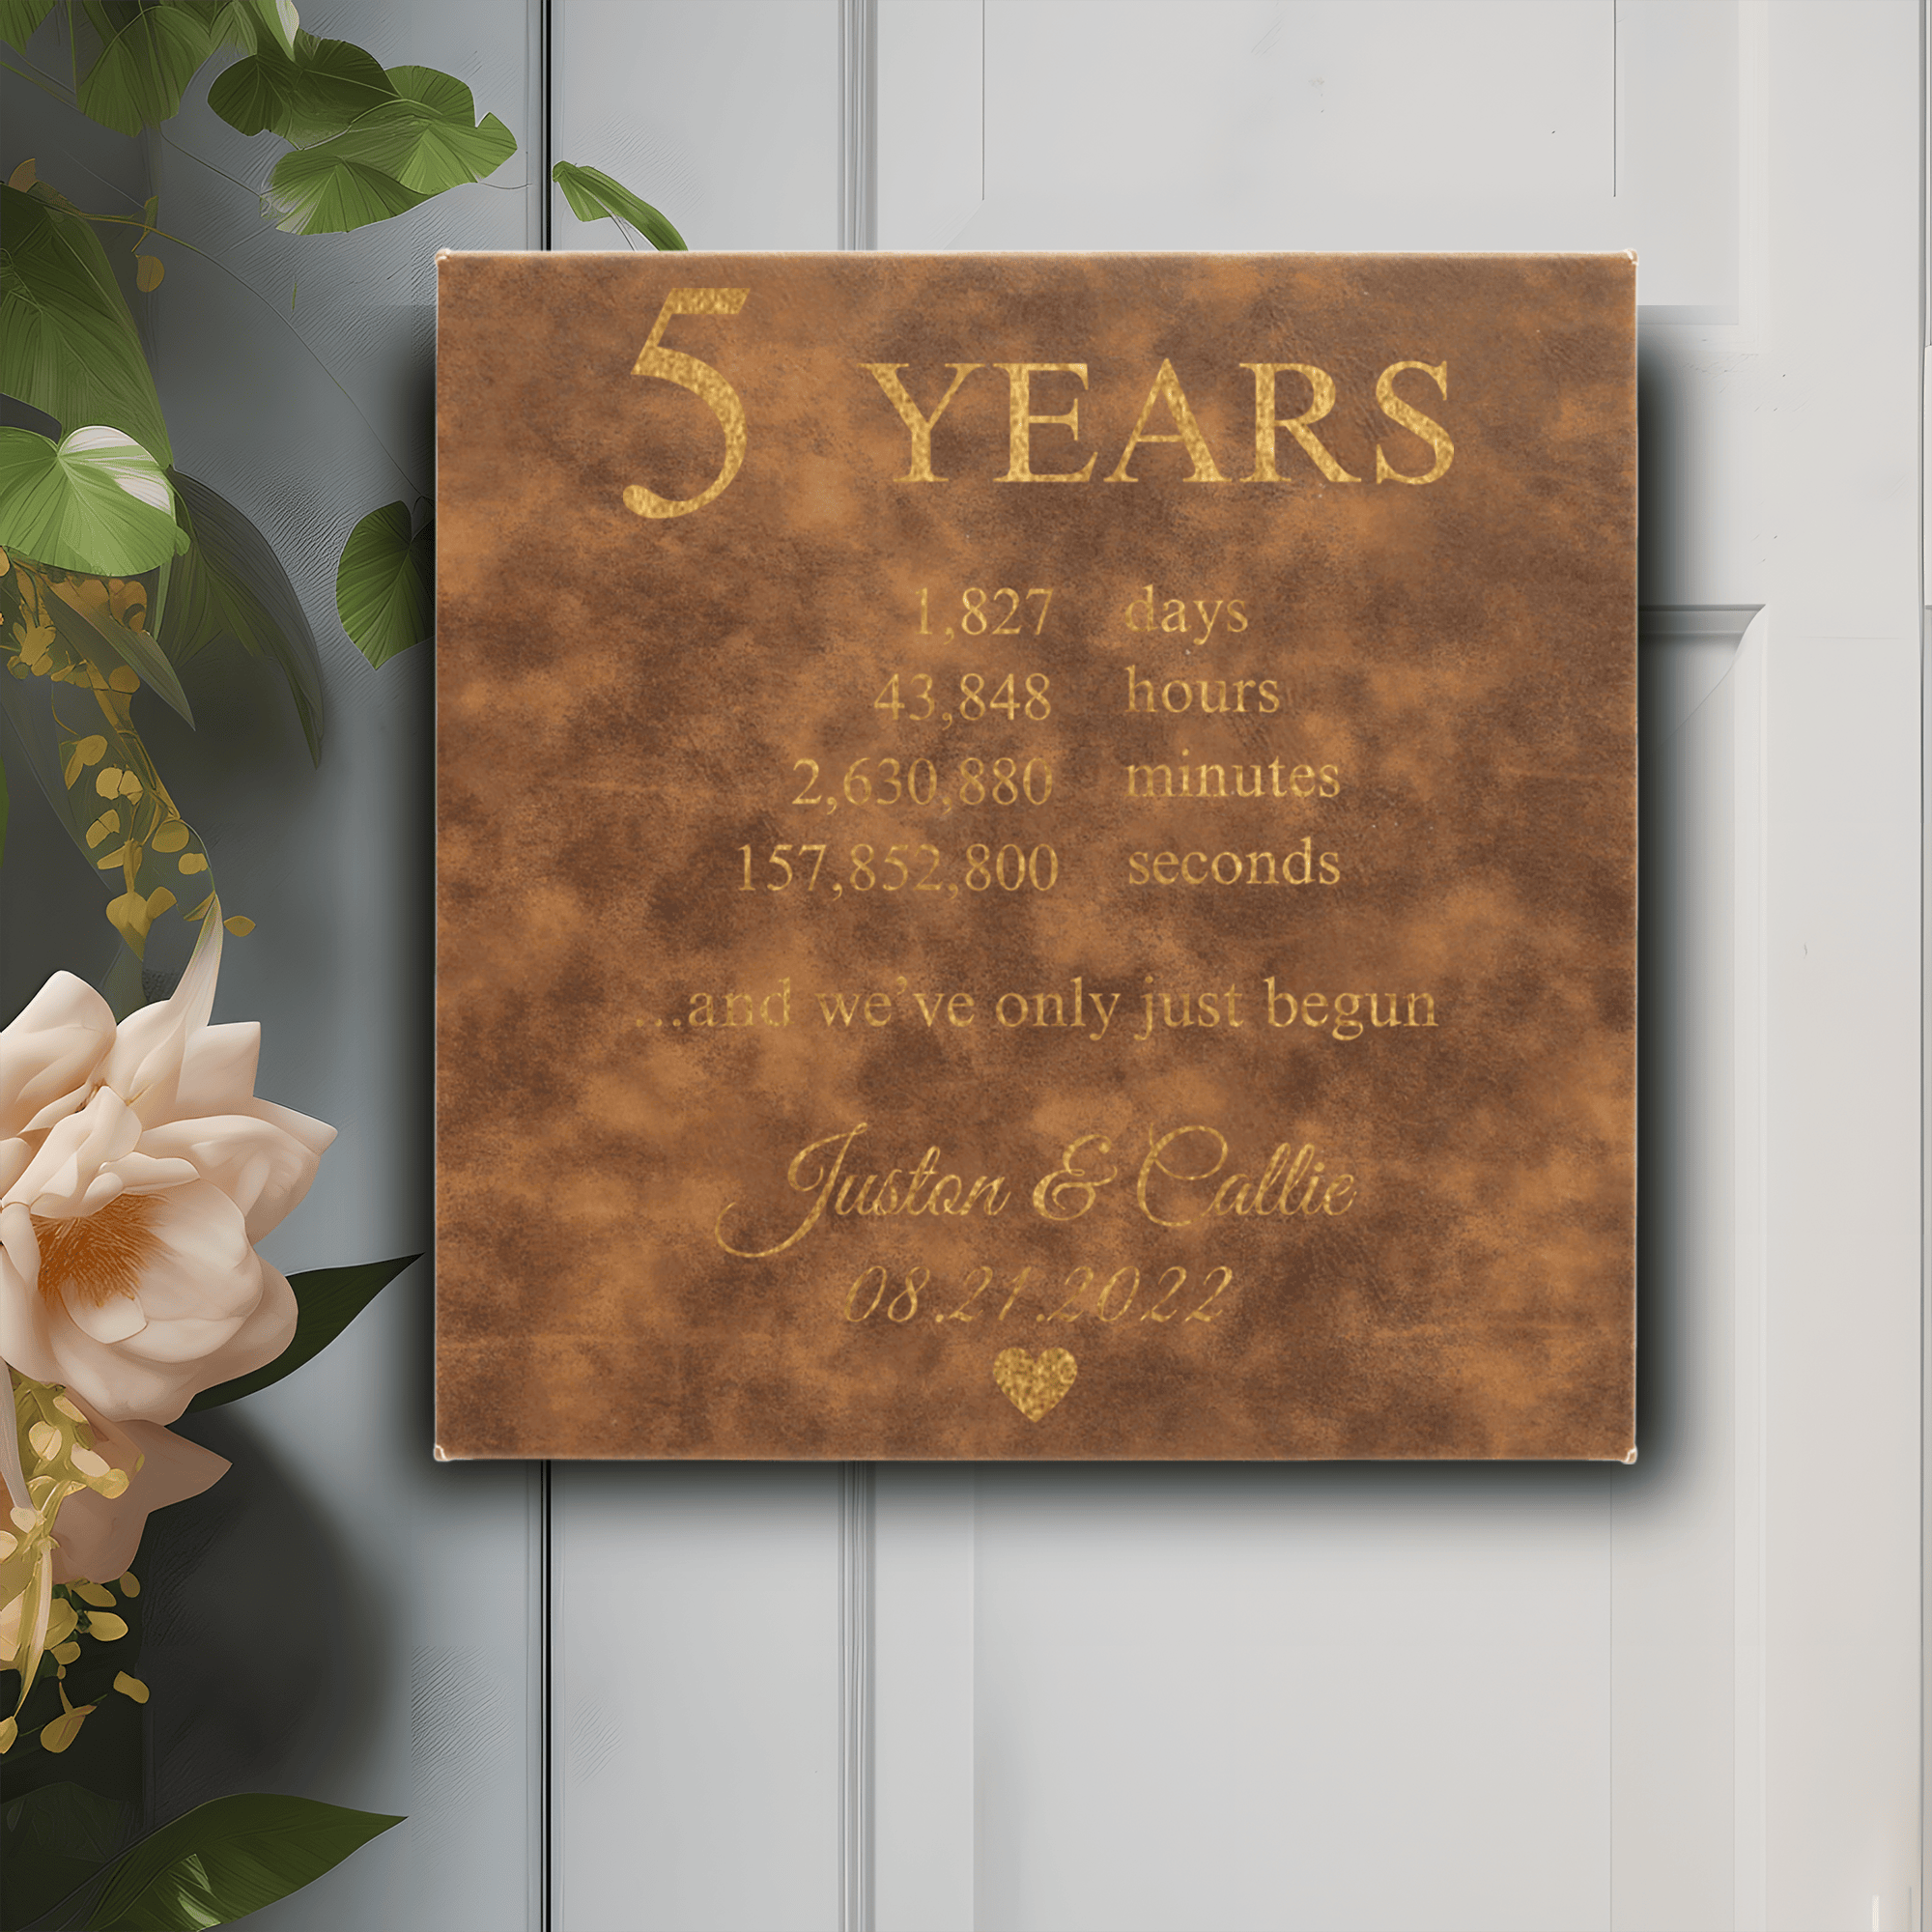 Rustic Gold Leather Wall Decor With 5 Year Anniversary Design